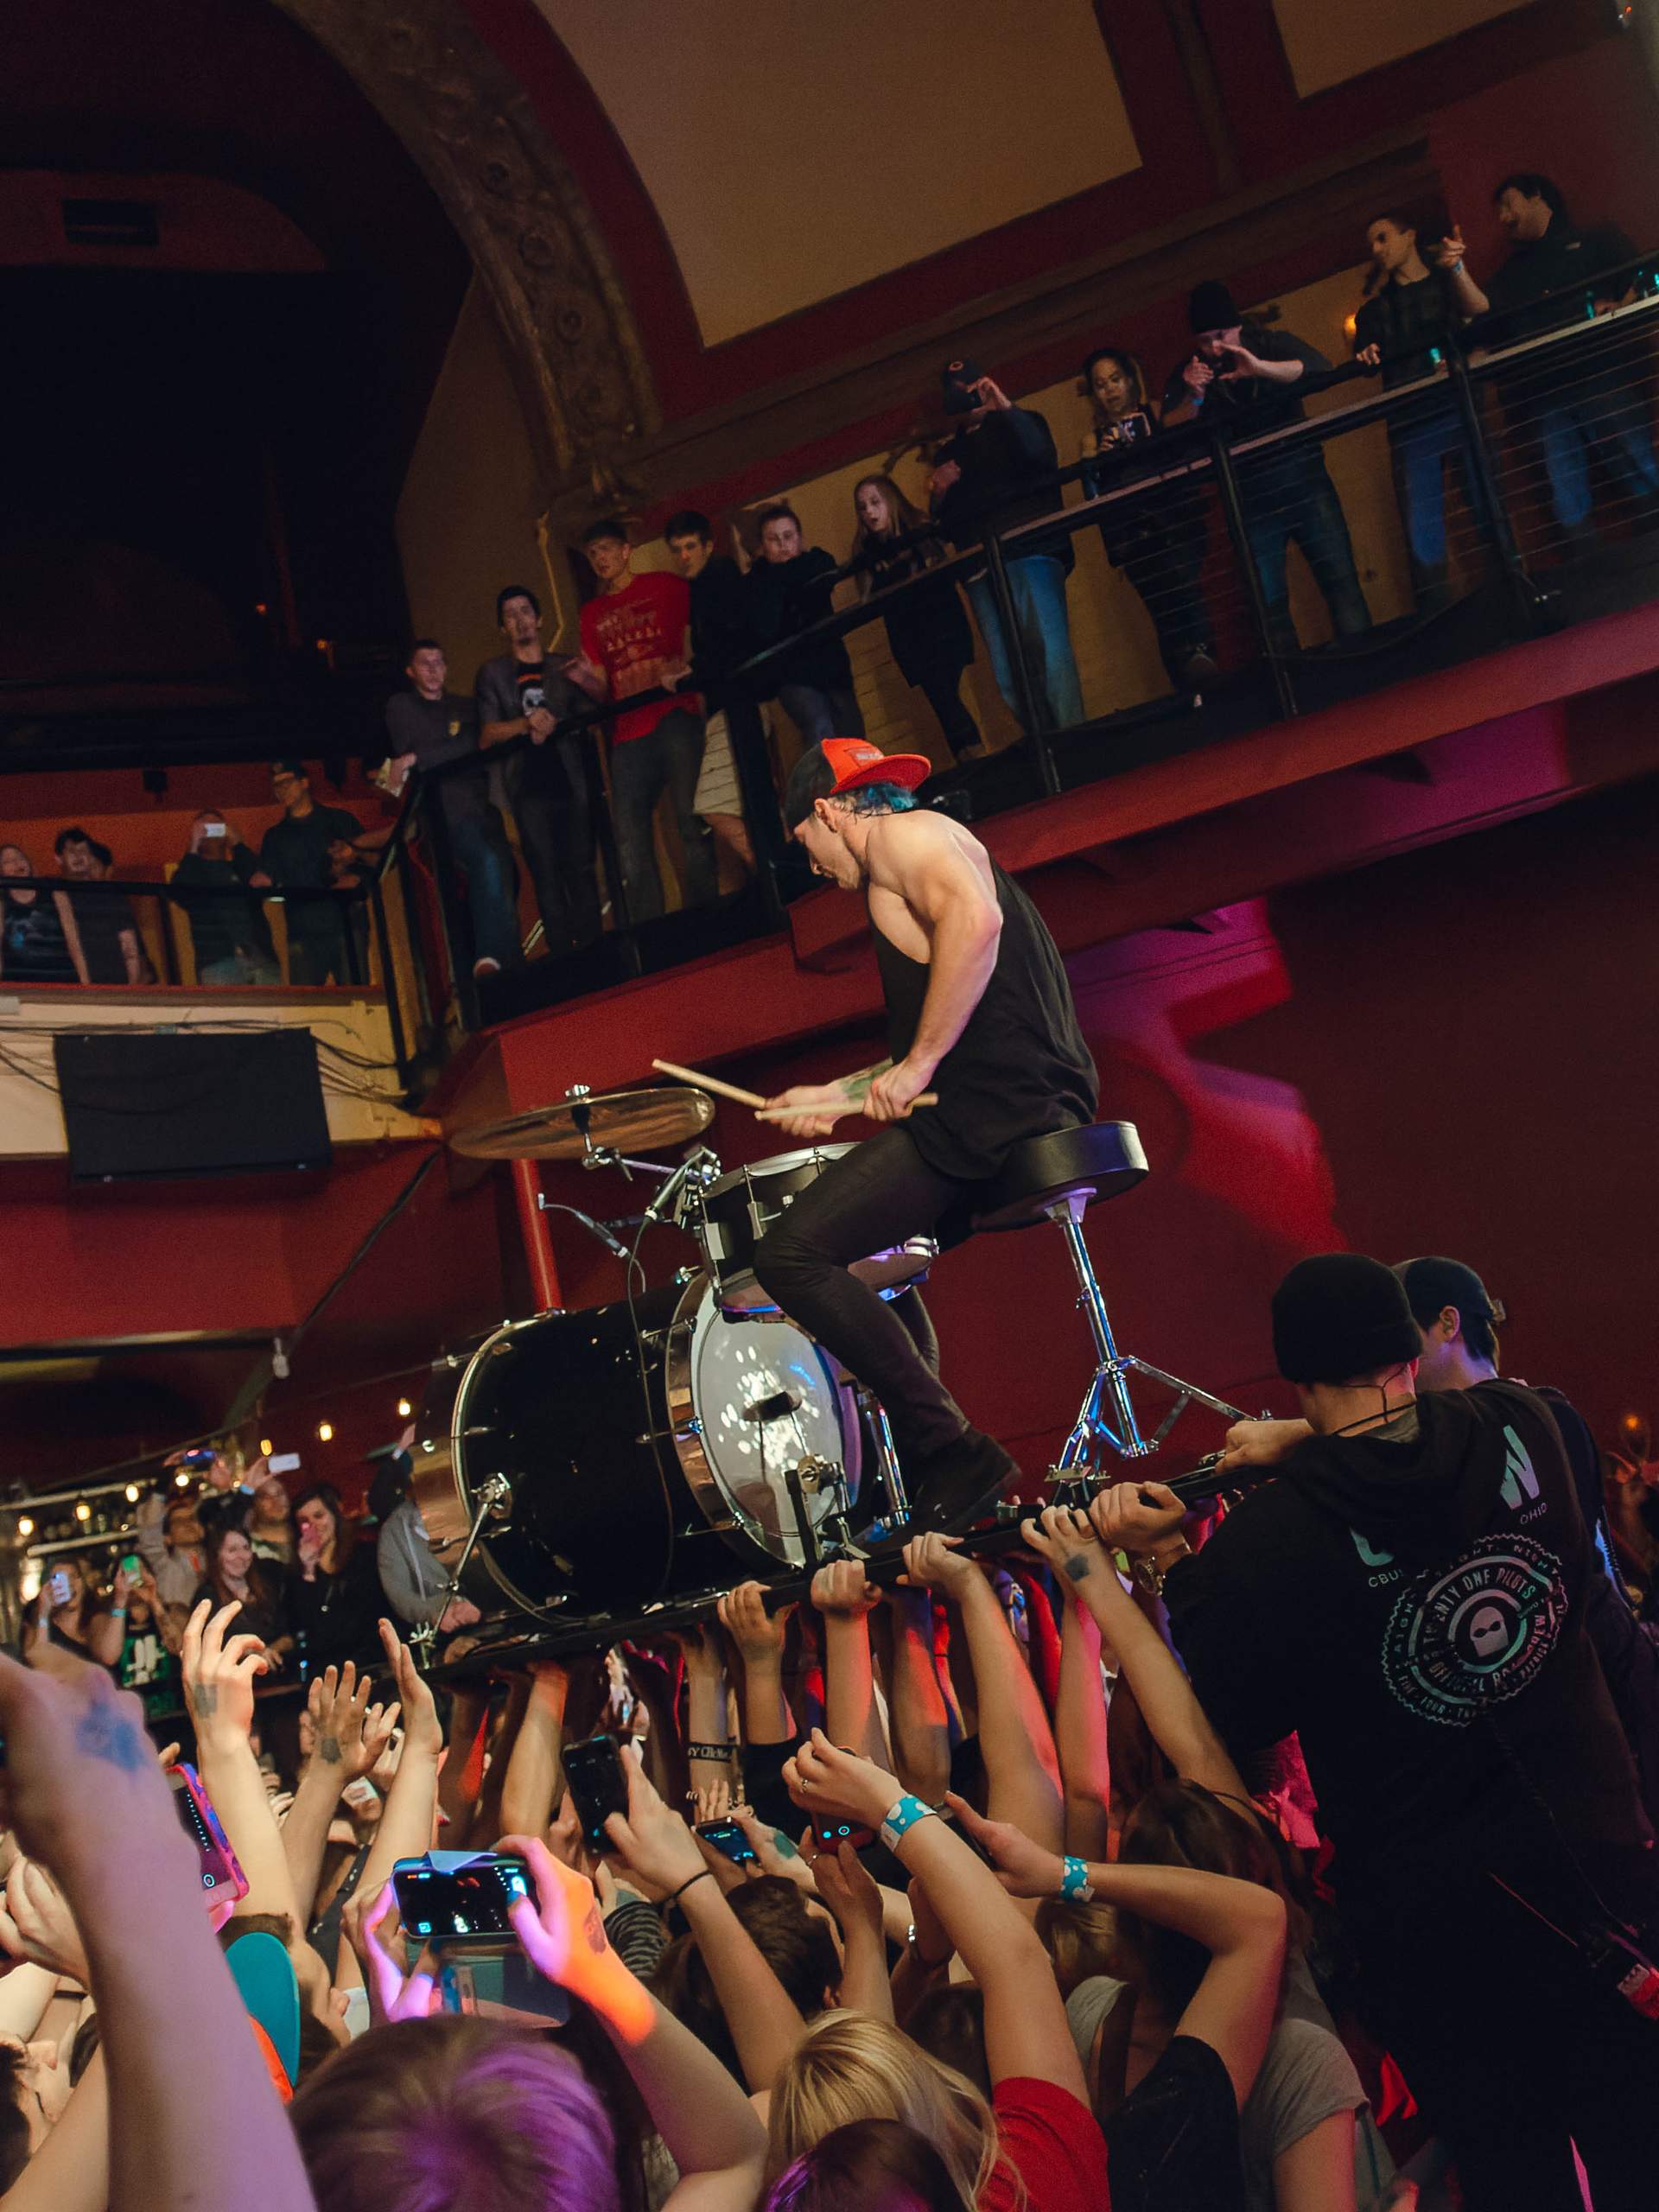 21 Pilots performing at The Majestic in Madison, WI April 16th, 2014, photography by Ross Harried for Second Crop Music